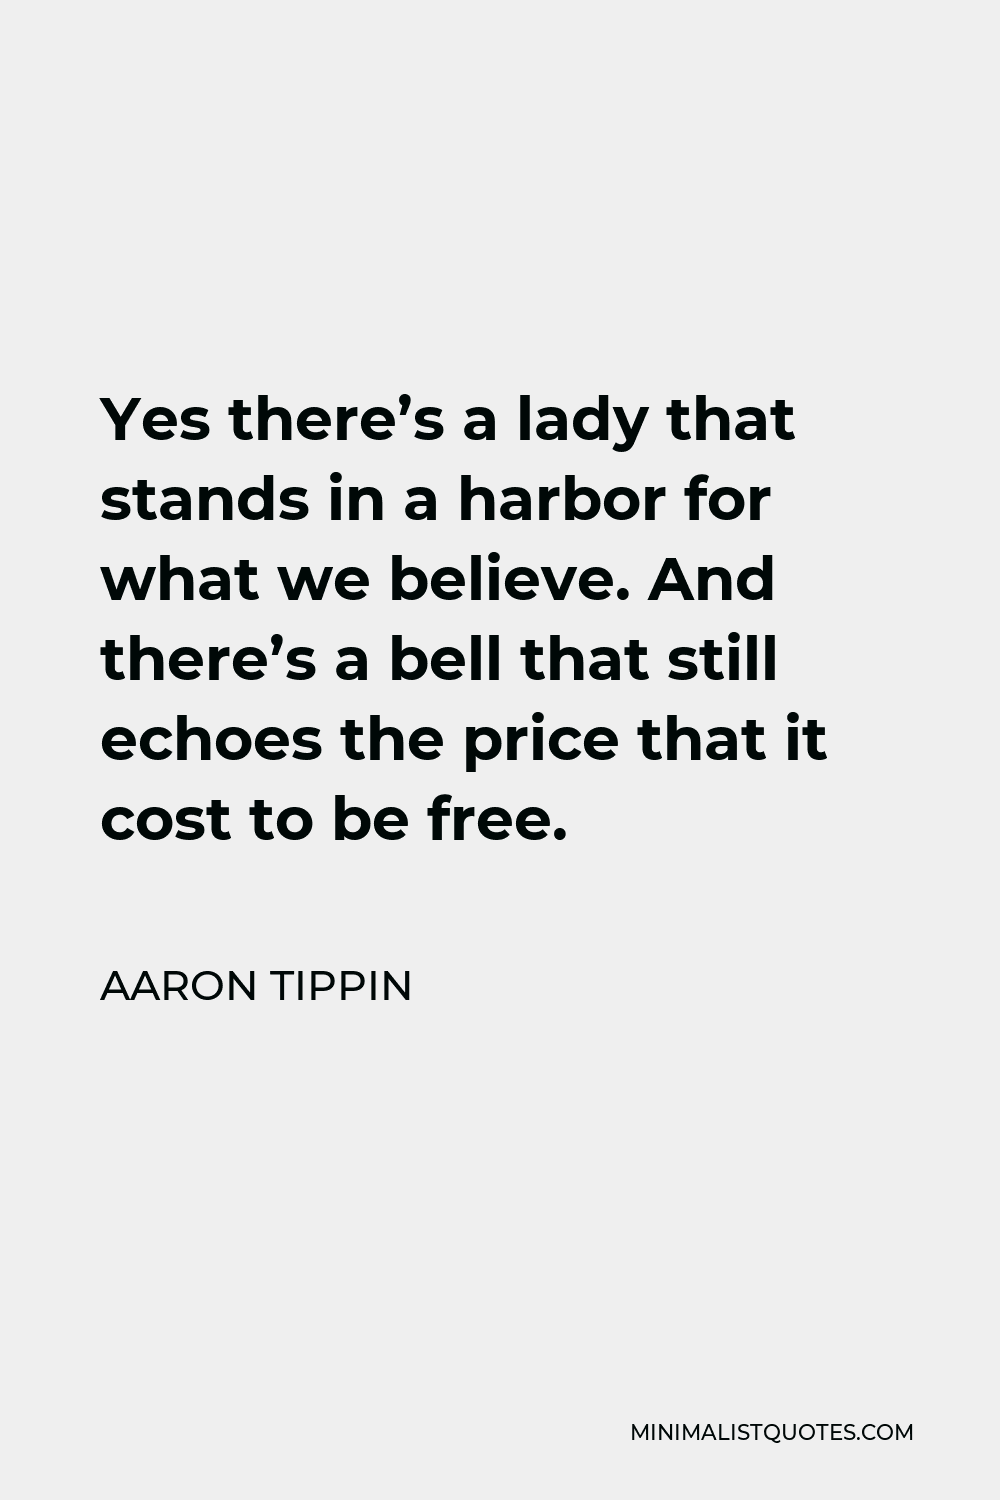 Aaron Tippin Quote - Yes there’s a lady that stands in a harbor for what we believe. And there’s a bell that still echoes the price that it cost to be free.